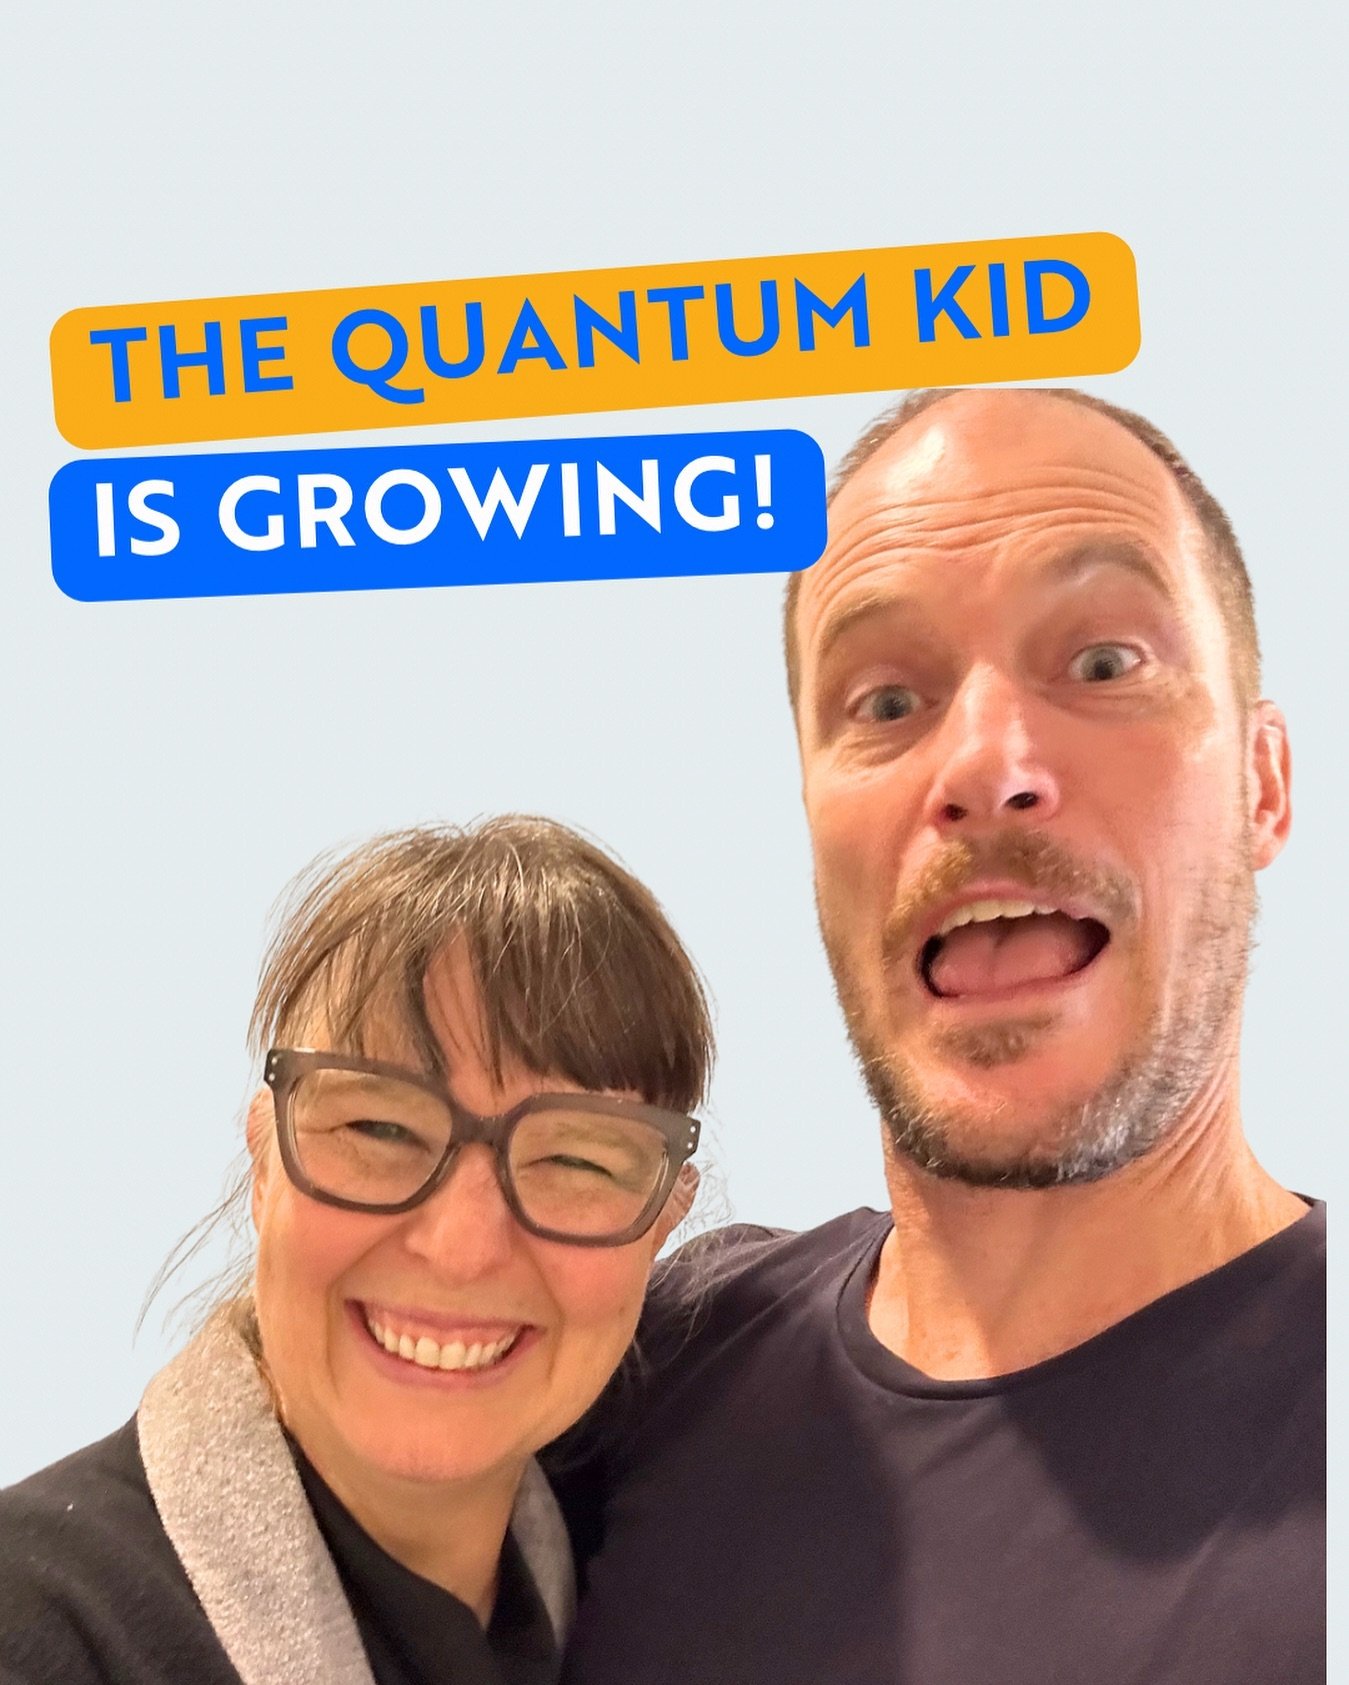 We can hardly wait to share the exciting news! 🎉

The Quantum Kid team is growing 🌱
.
.
.
#thequantumkid #kidsdentist #kidsdentistry #osteopath #chiropractor #kidsosteopathy #kidschiropractic